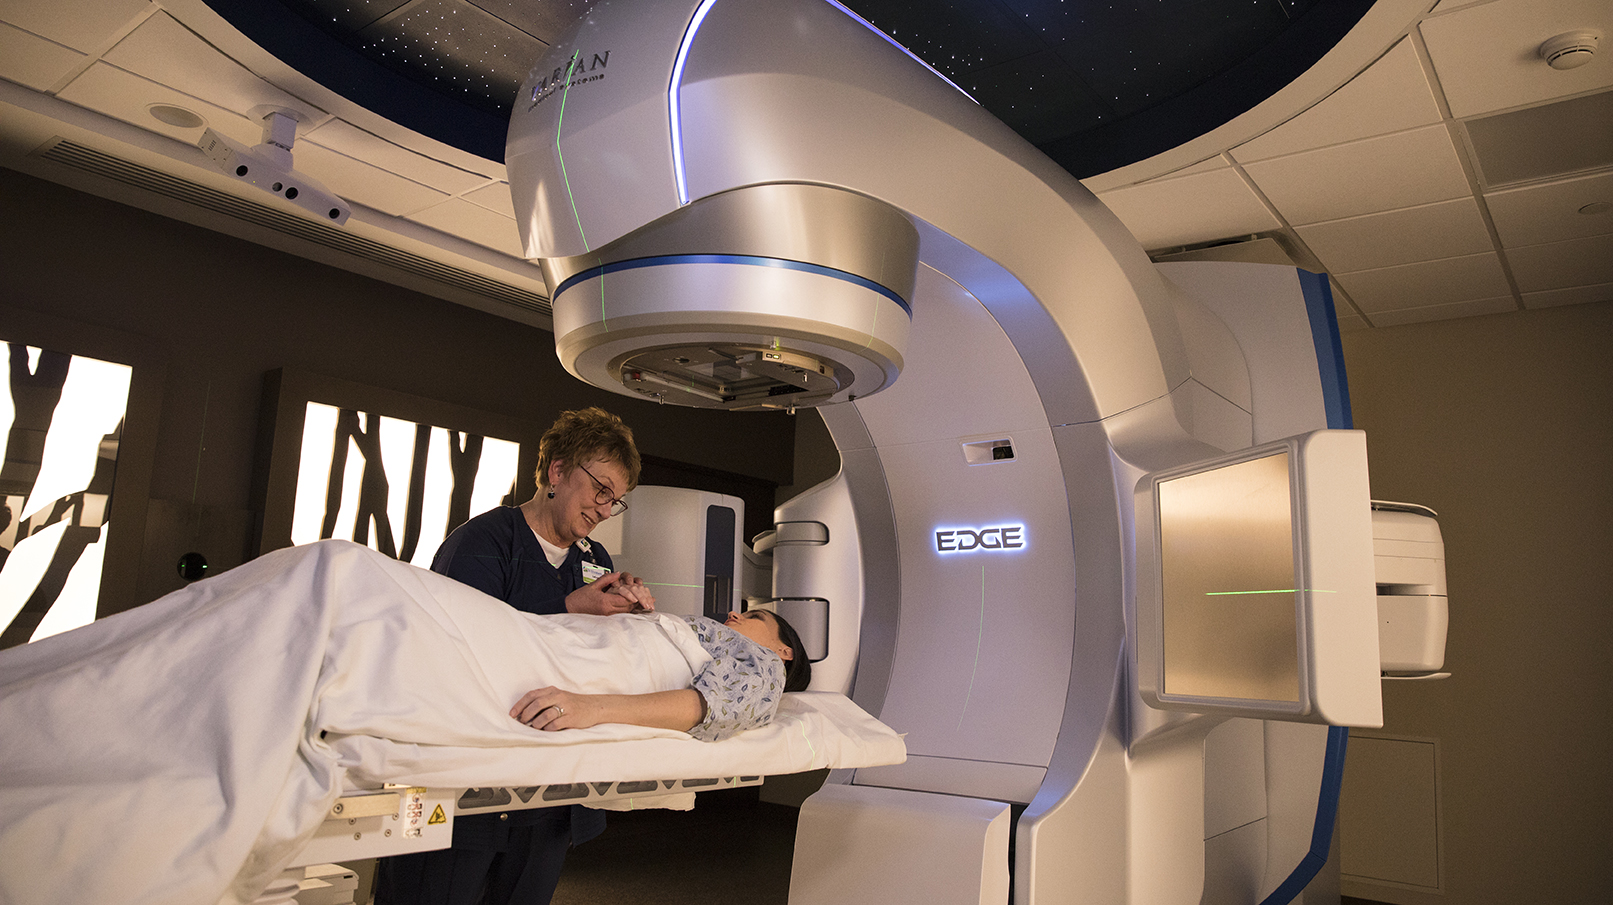 Preparing for Your First Radiation Treatment